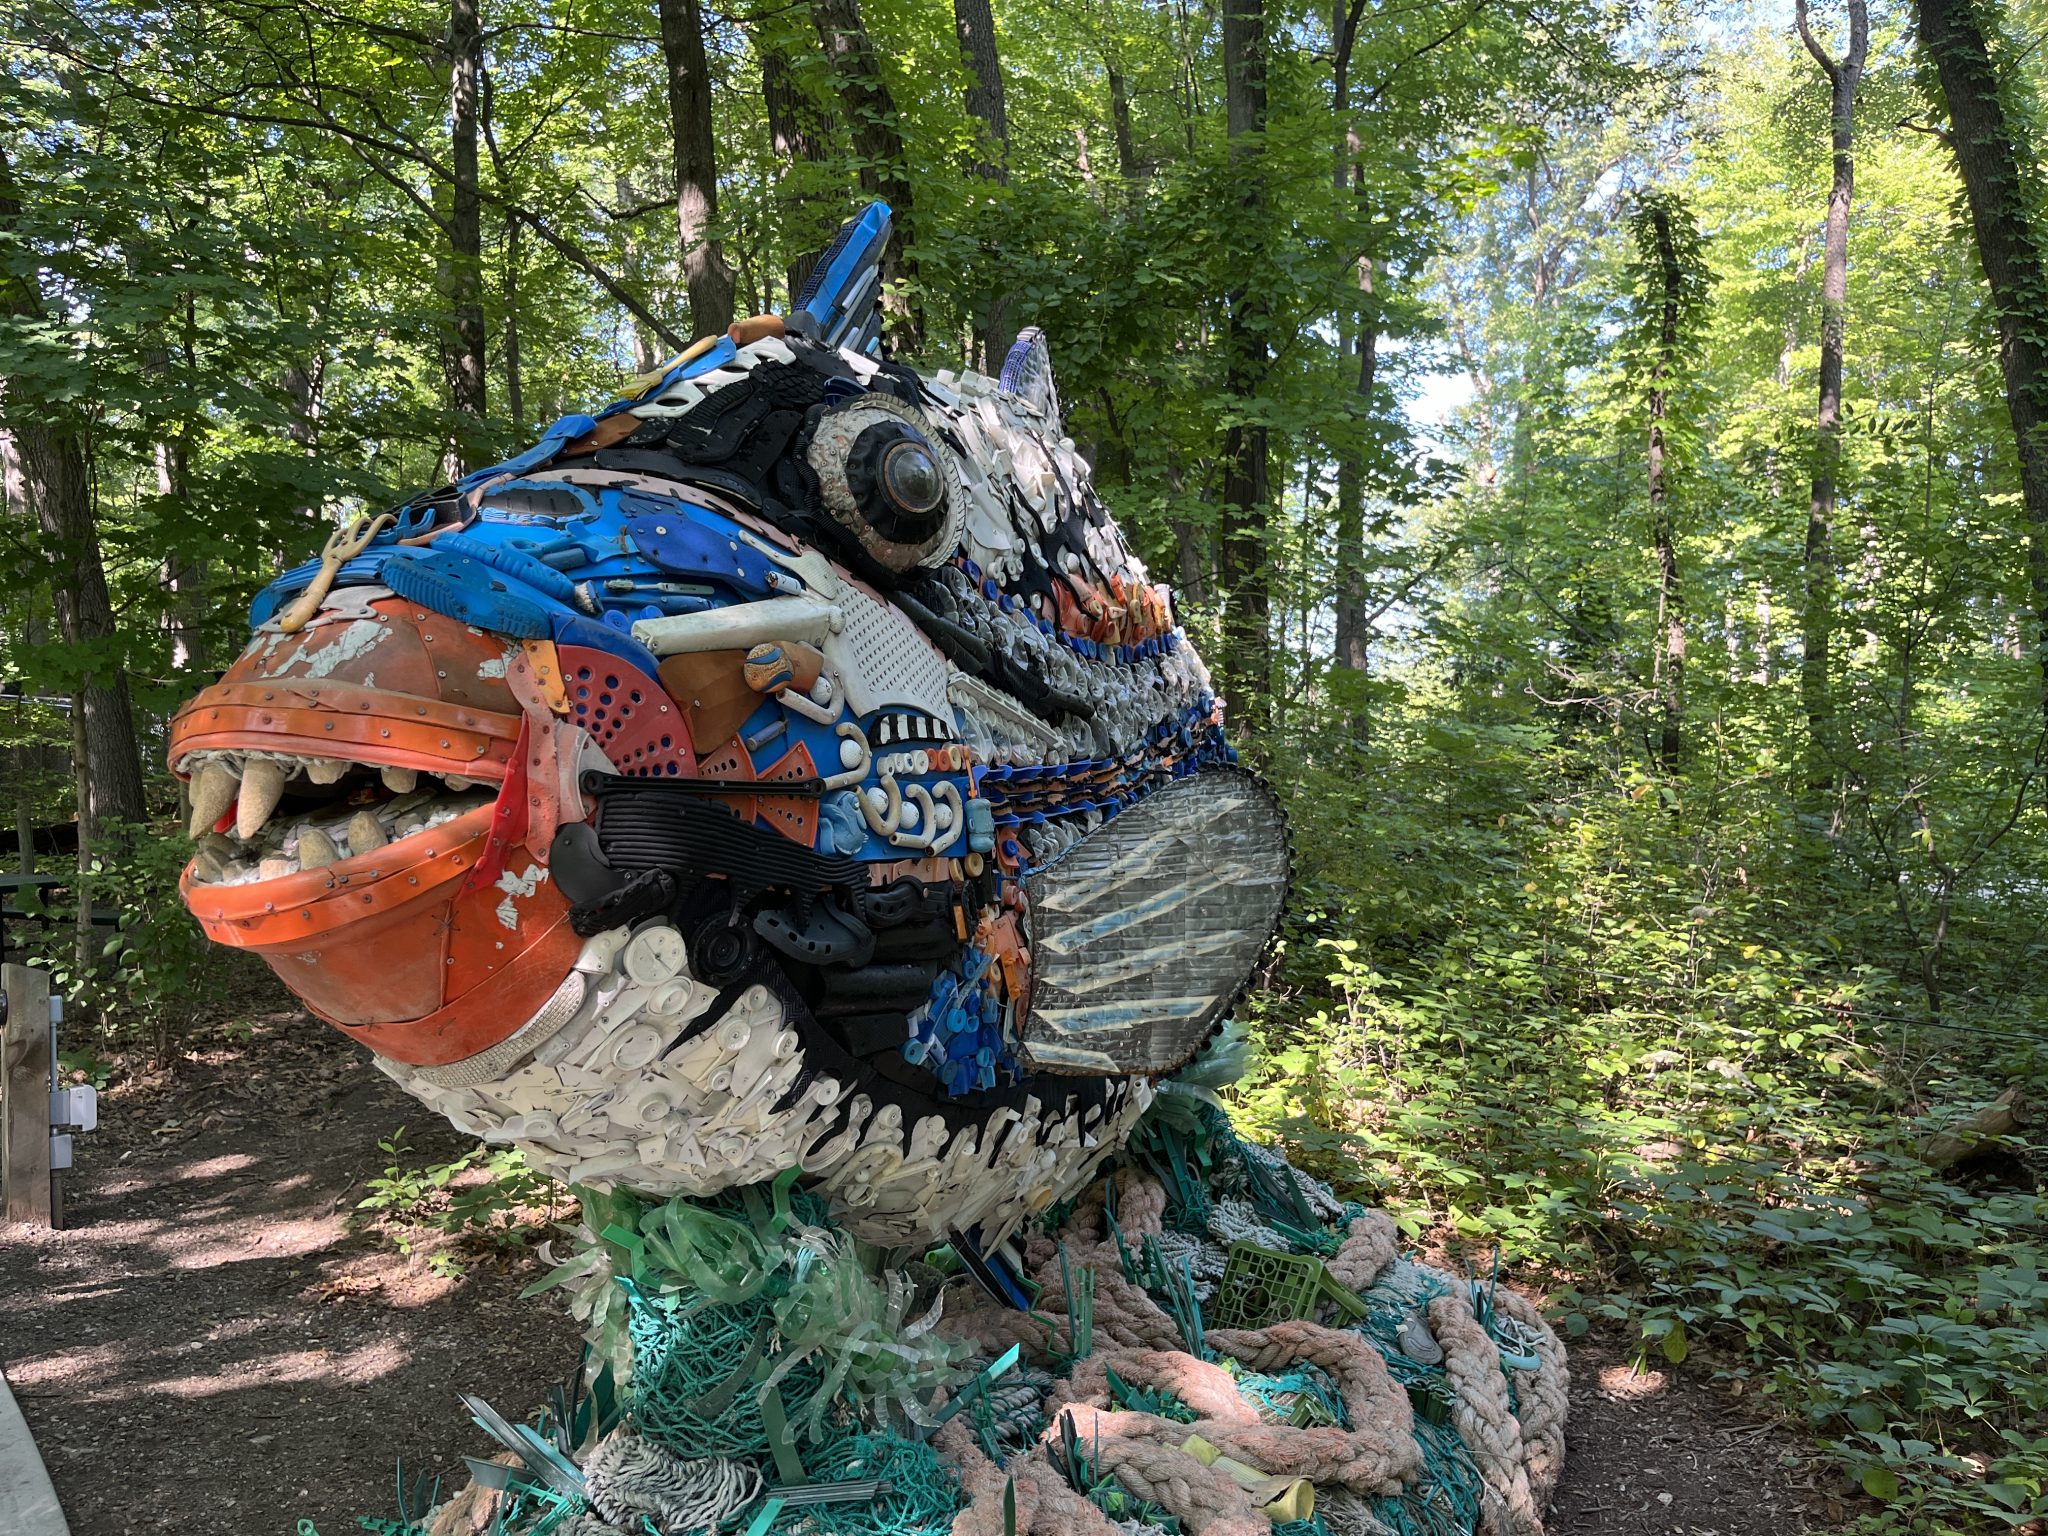 Fish sculpture made of trash